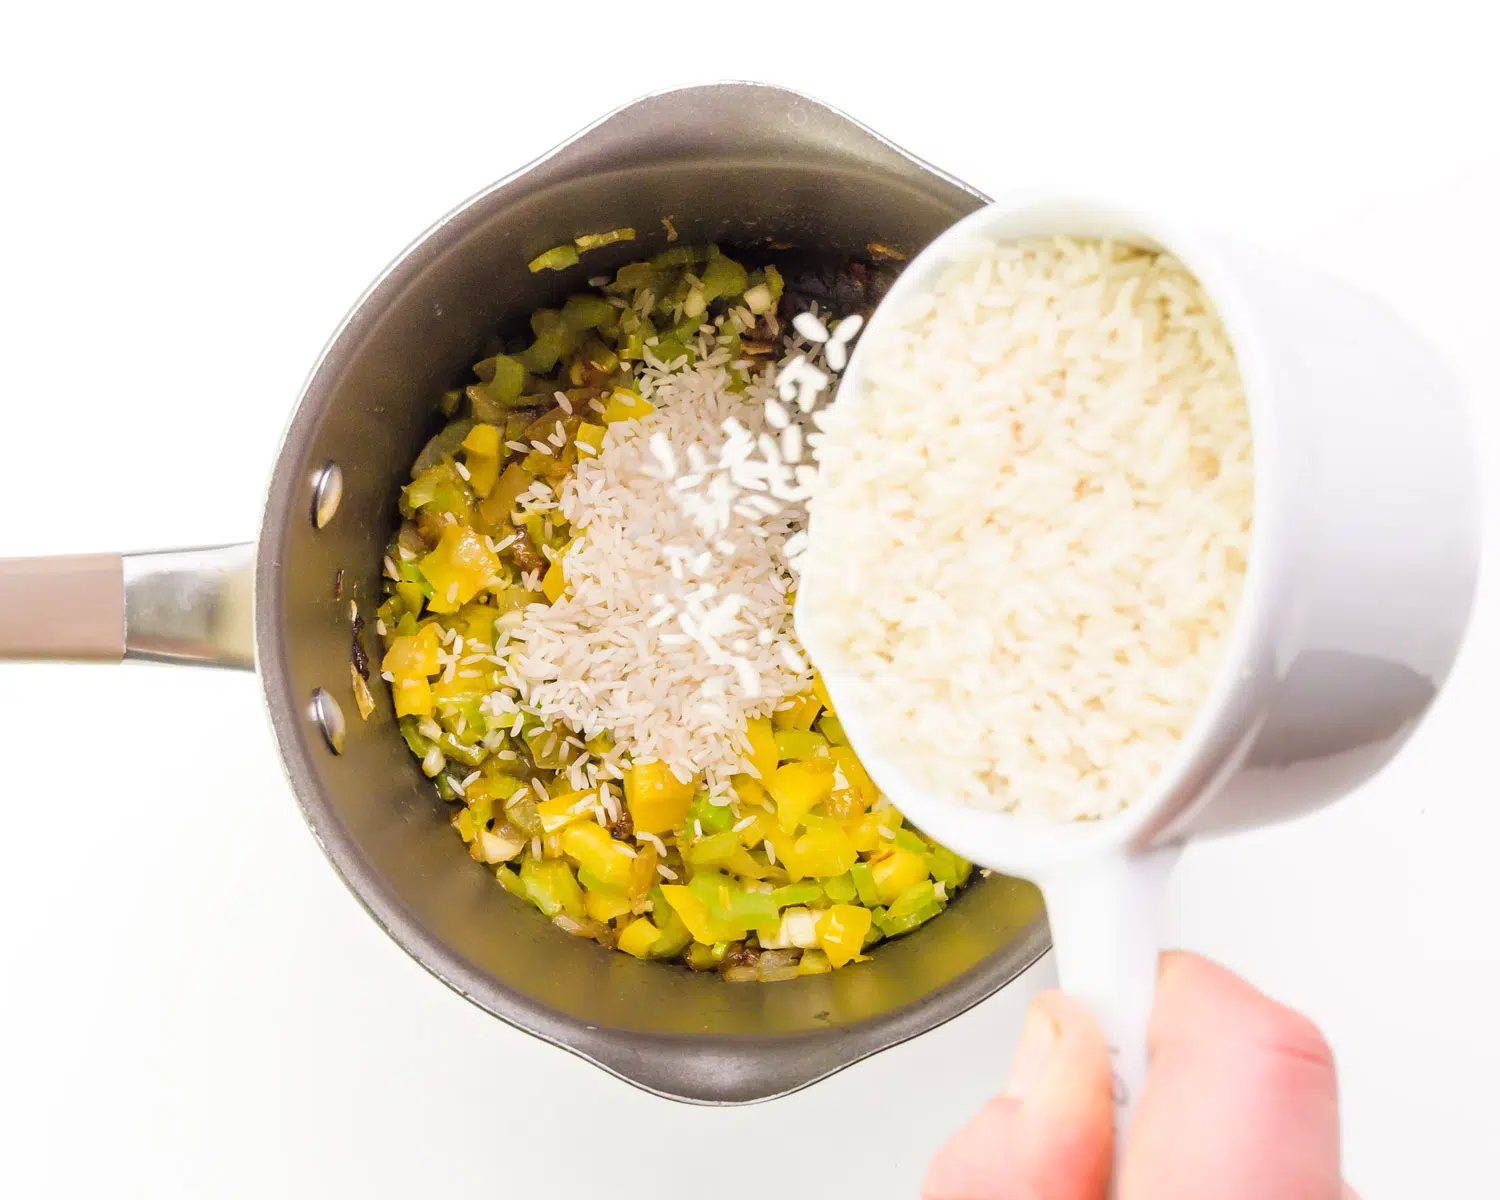 A hand holds a measuring cup of rice pouring it into a saucepan with cooked aromatic vegetables.